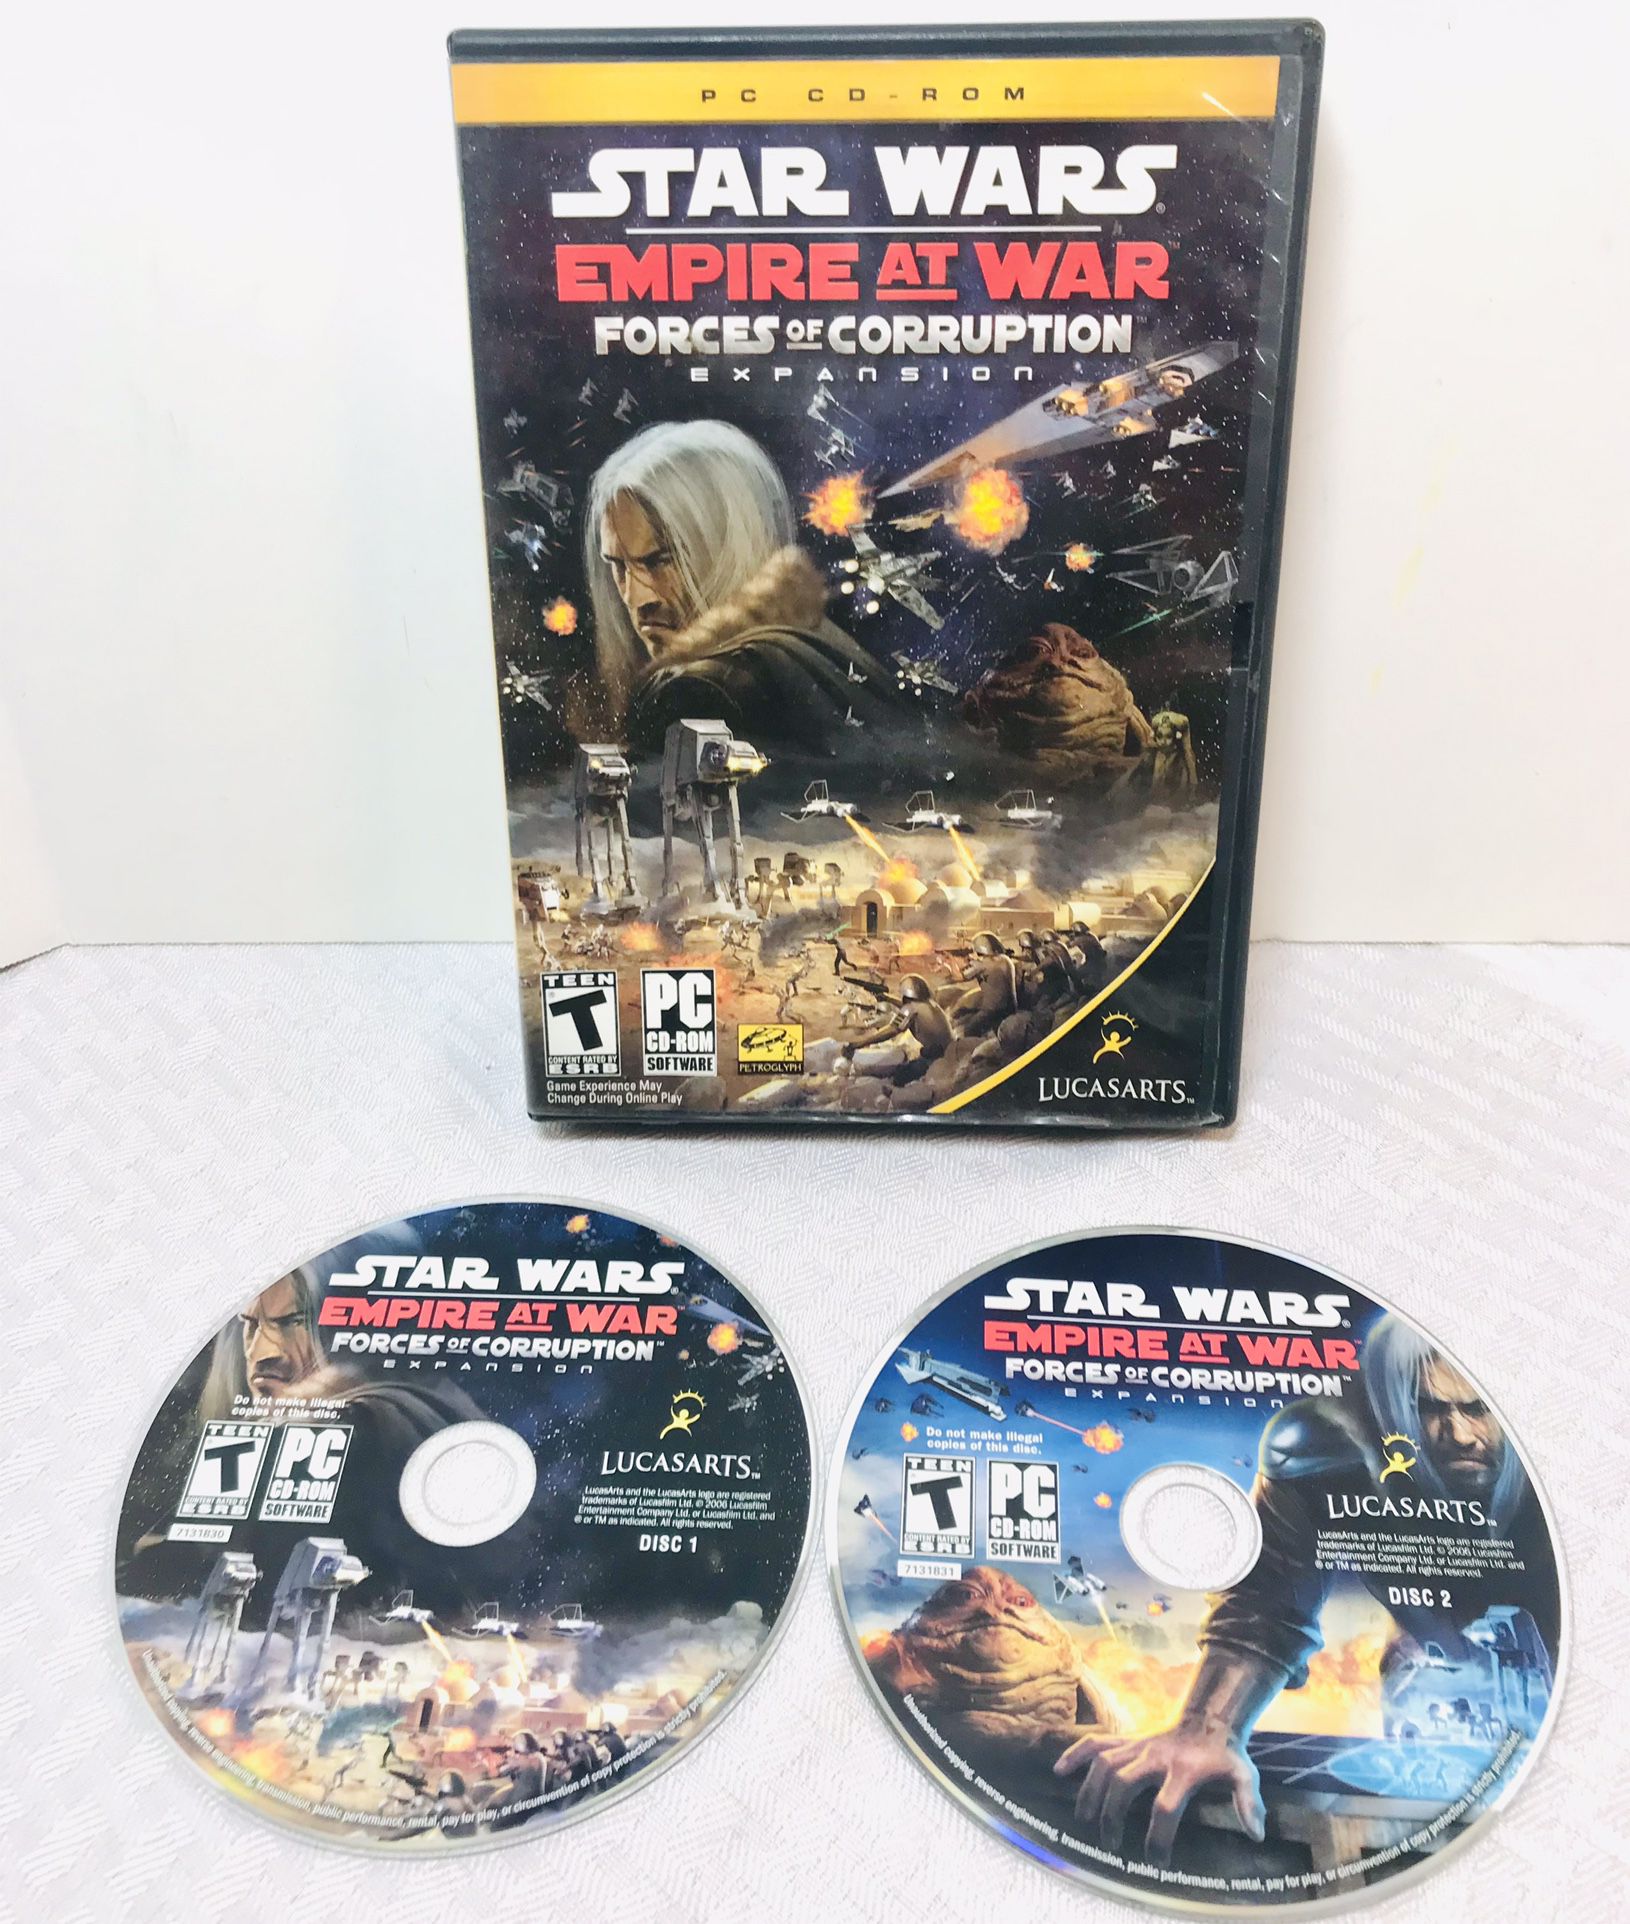 Star Wars Empire At War Forces Of Corruption PC Game